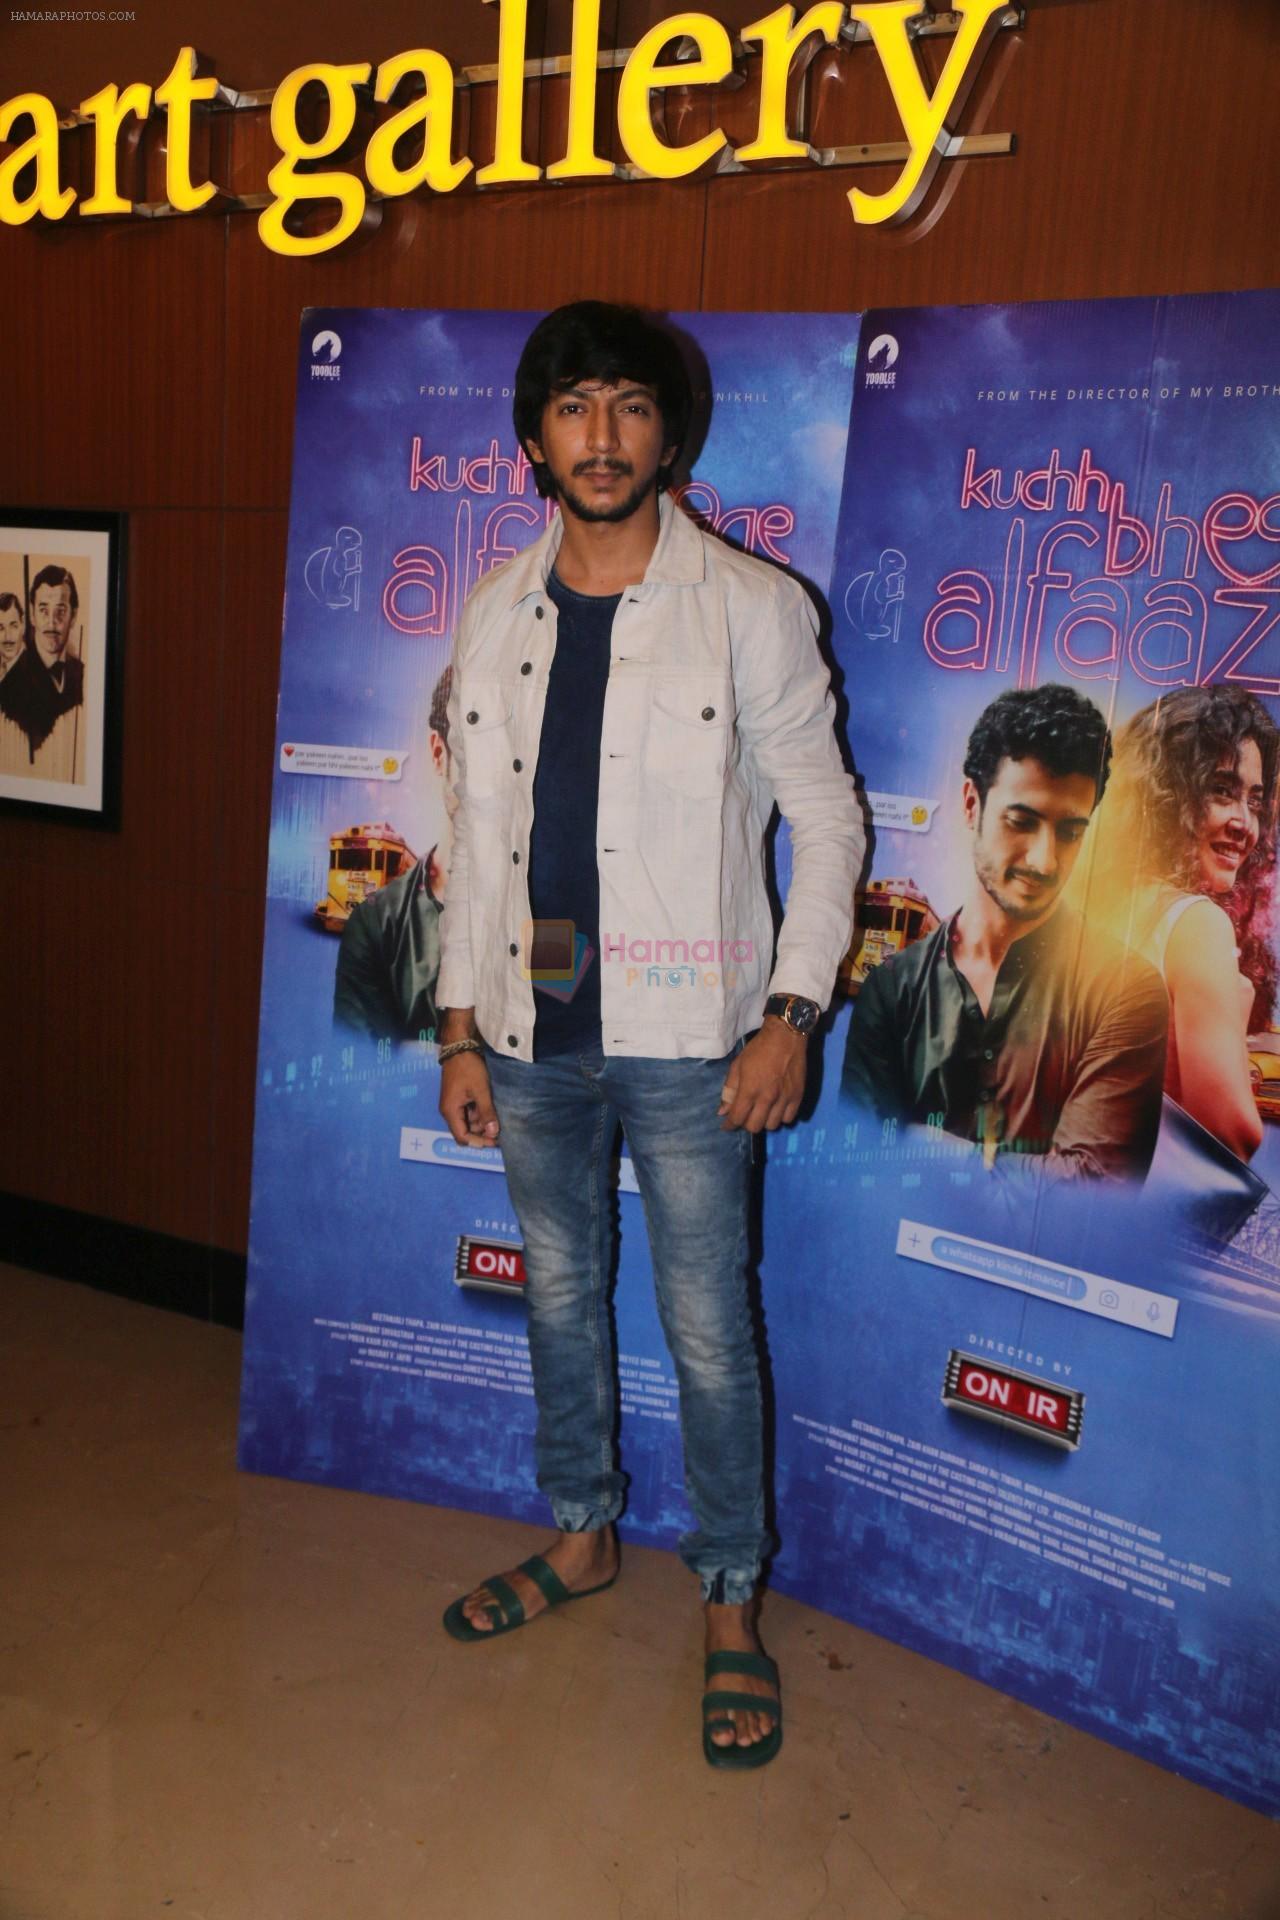 at the Special Screening Of Kuch Bheege Alfaaz on 15th Feb 2018